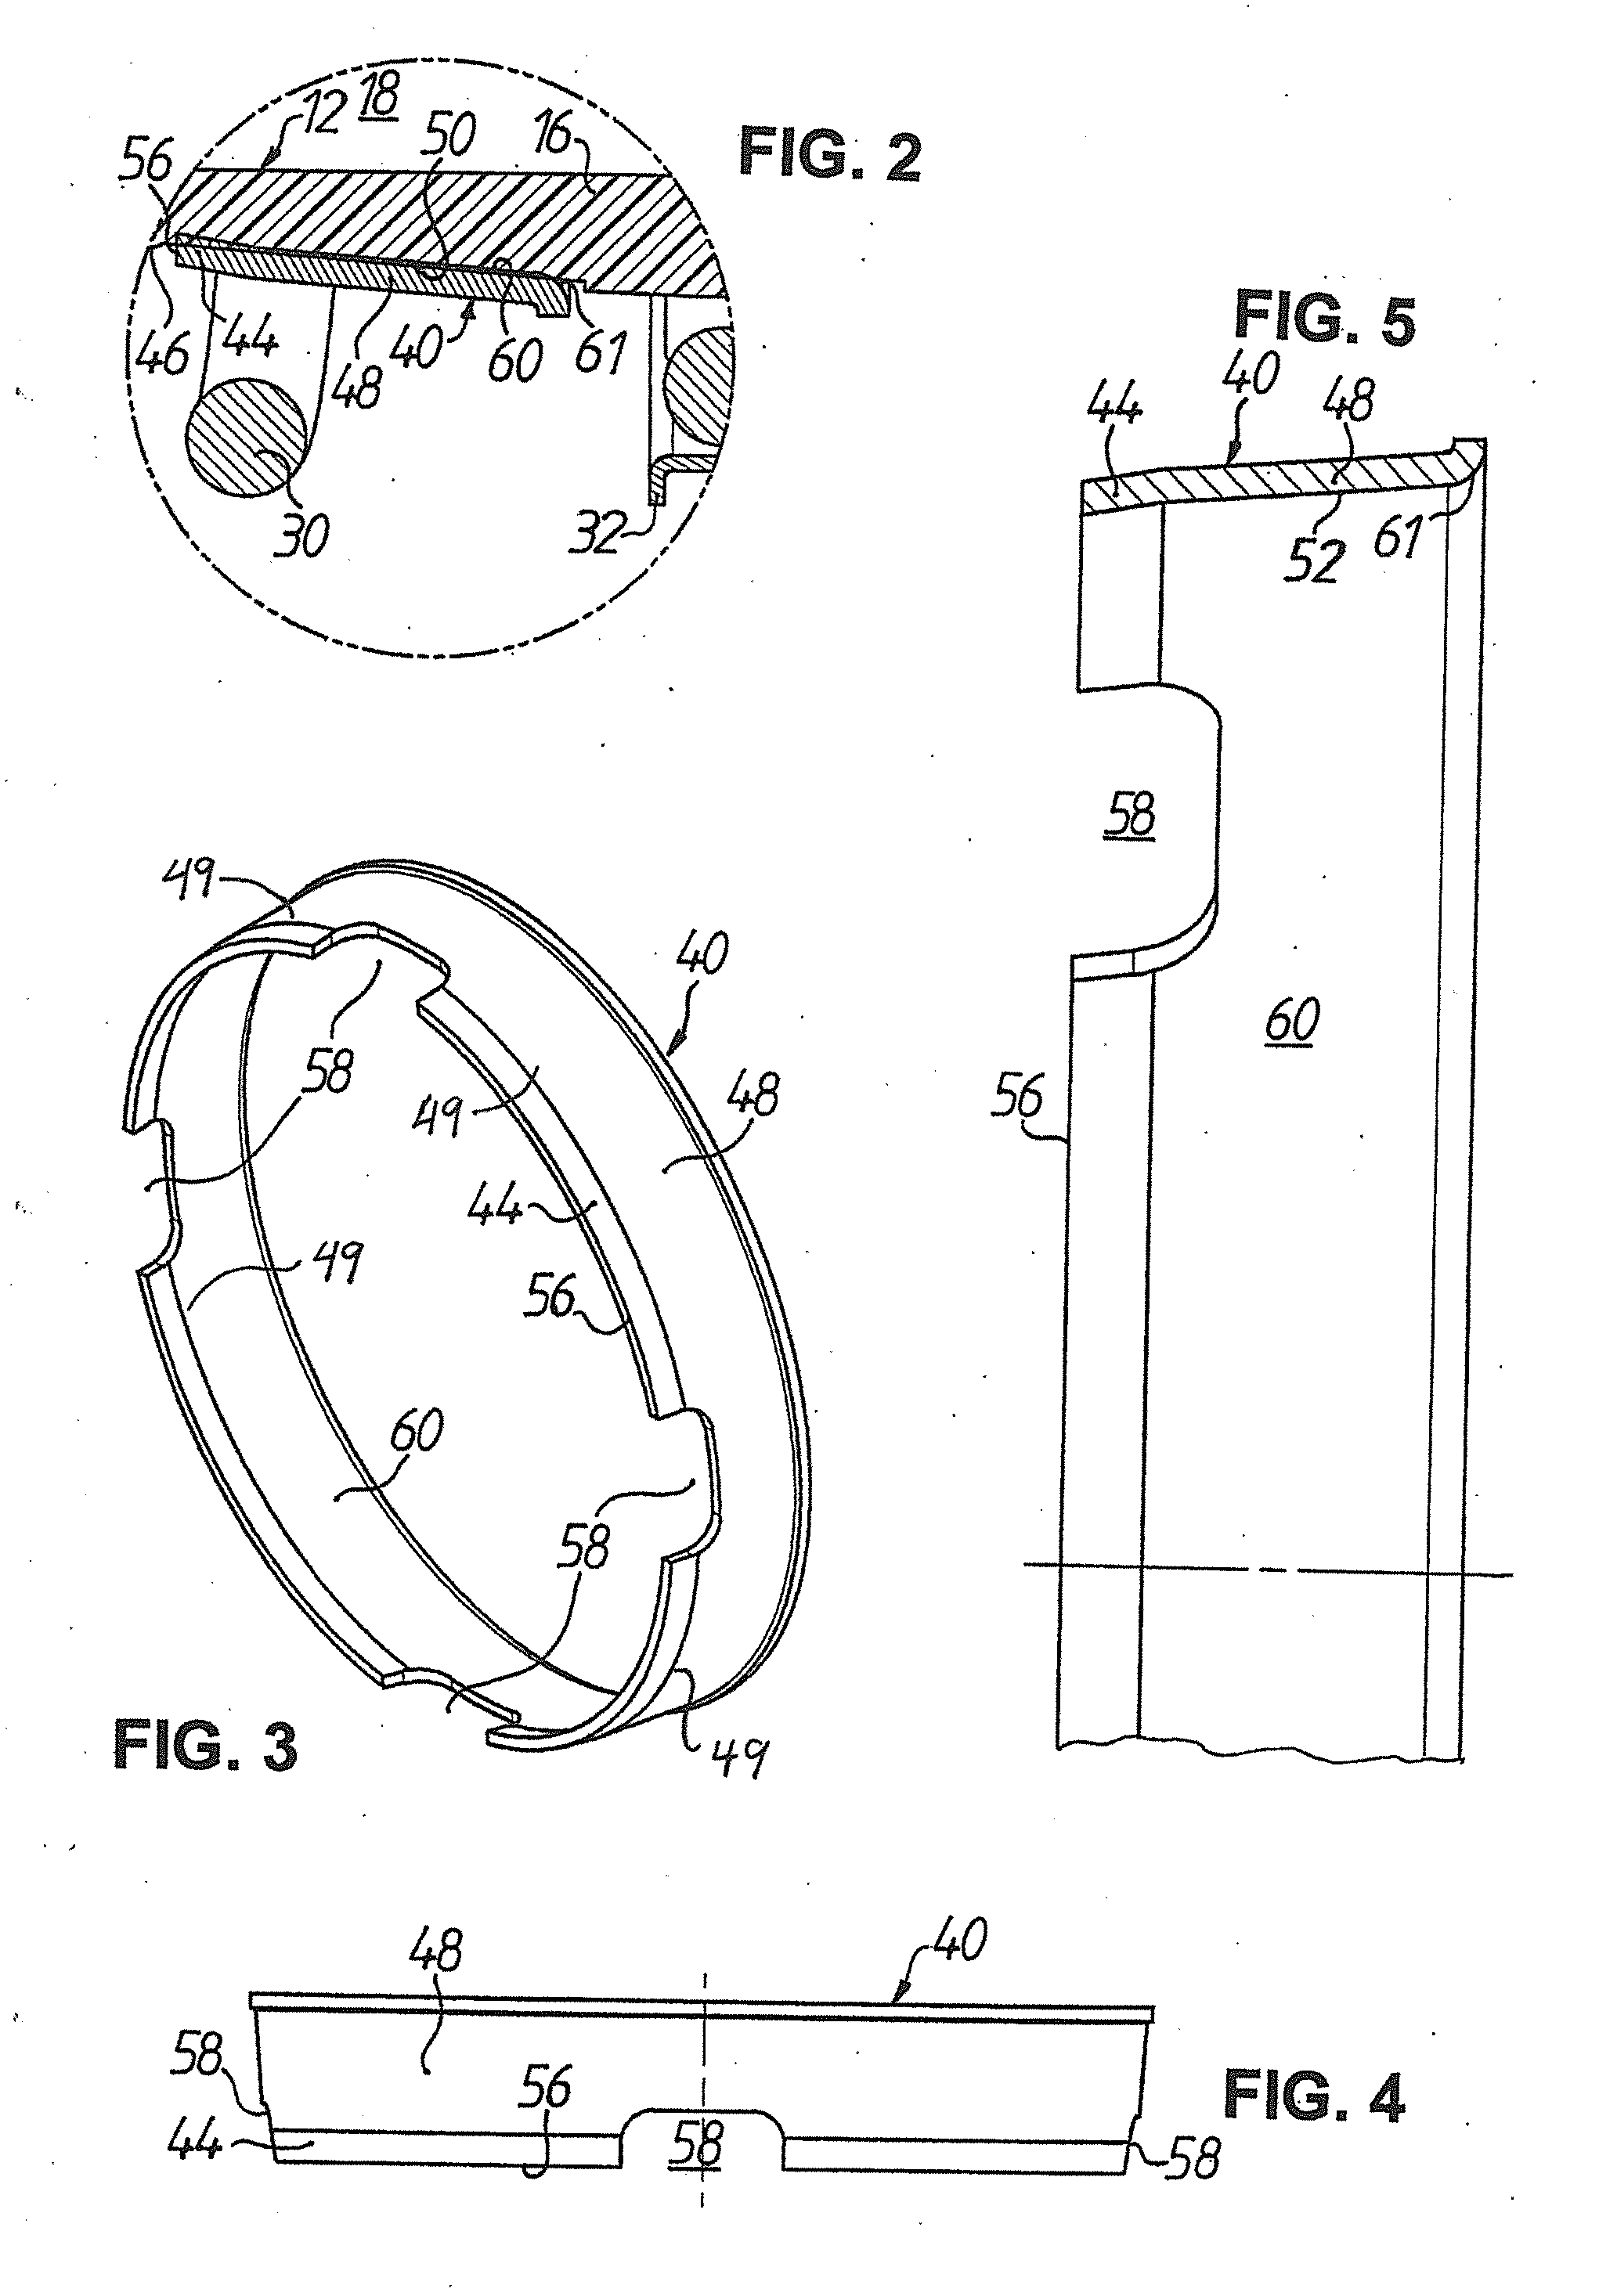 Concentric slave cylinder for a hydraulic clutch actuator